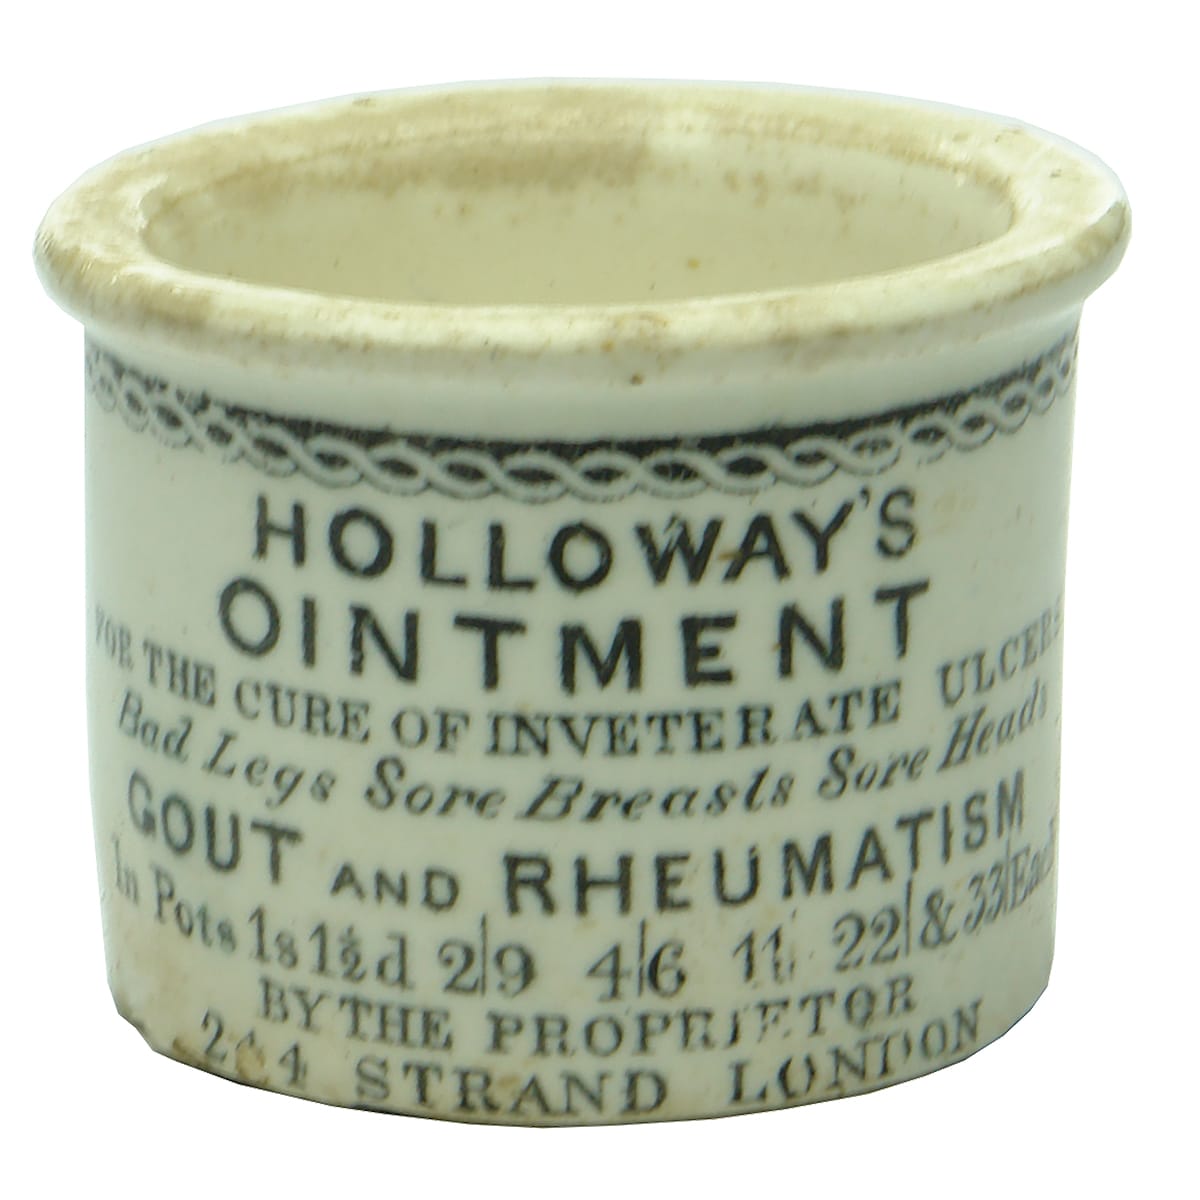 Ointment Pot. Holloway's Ointment. Strand, London.